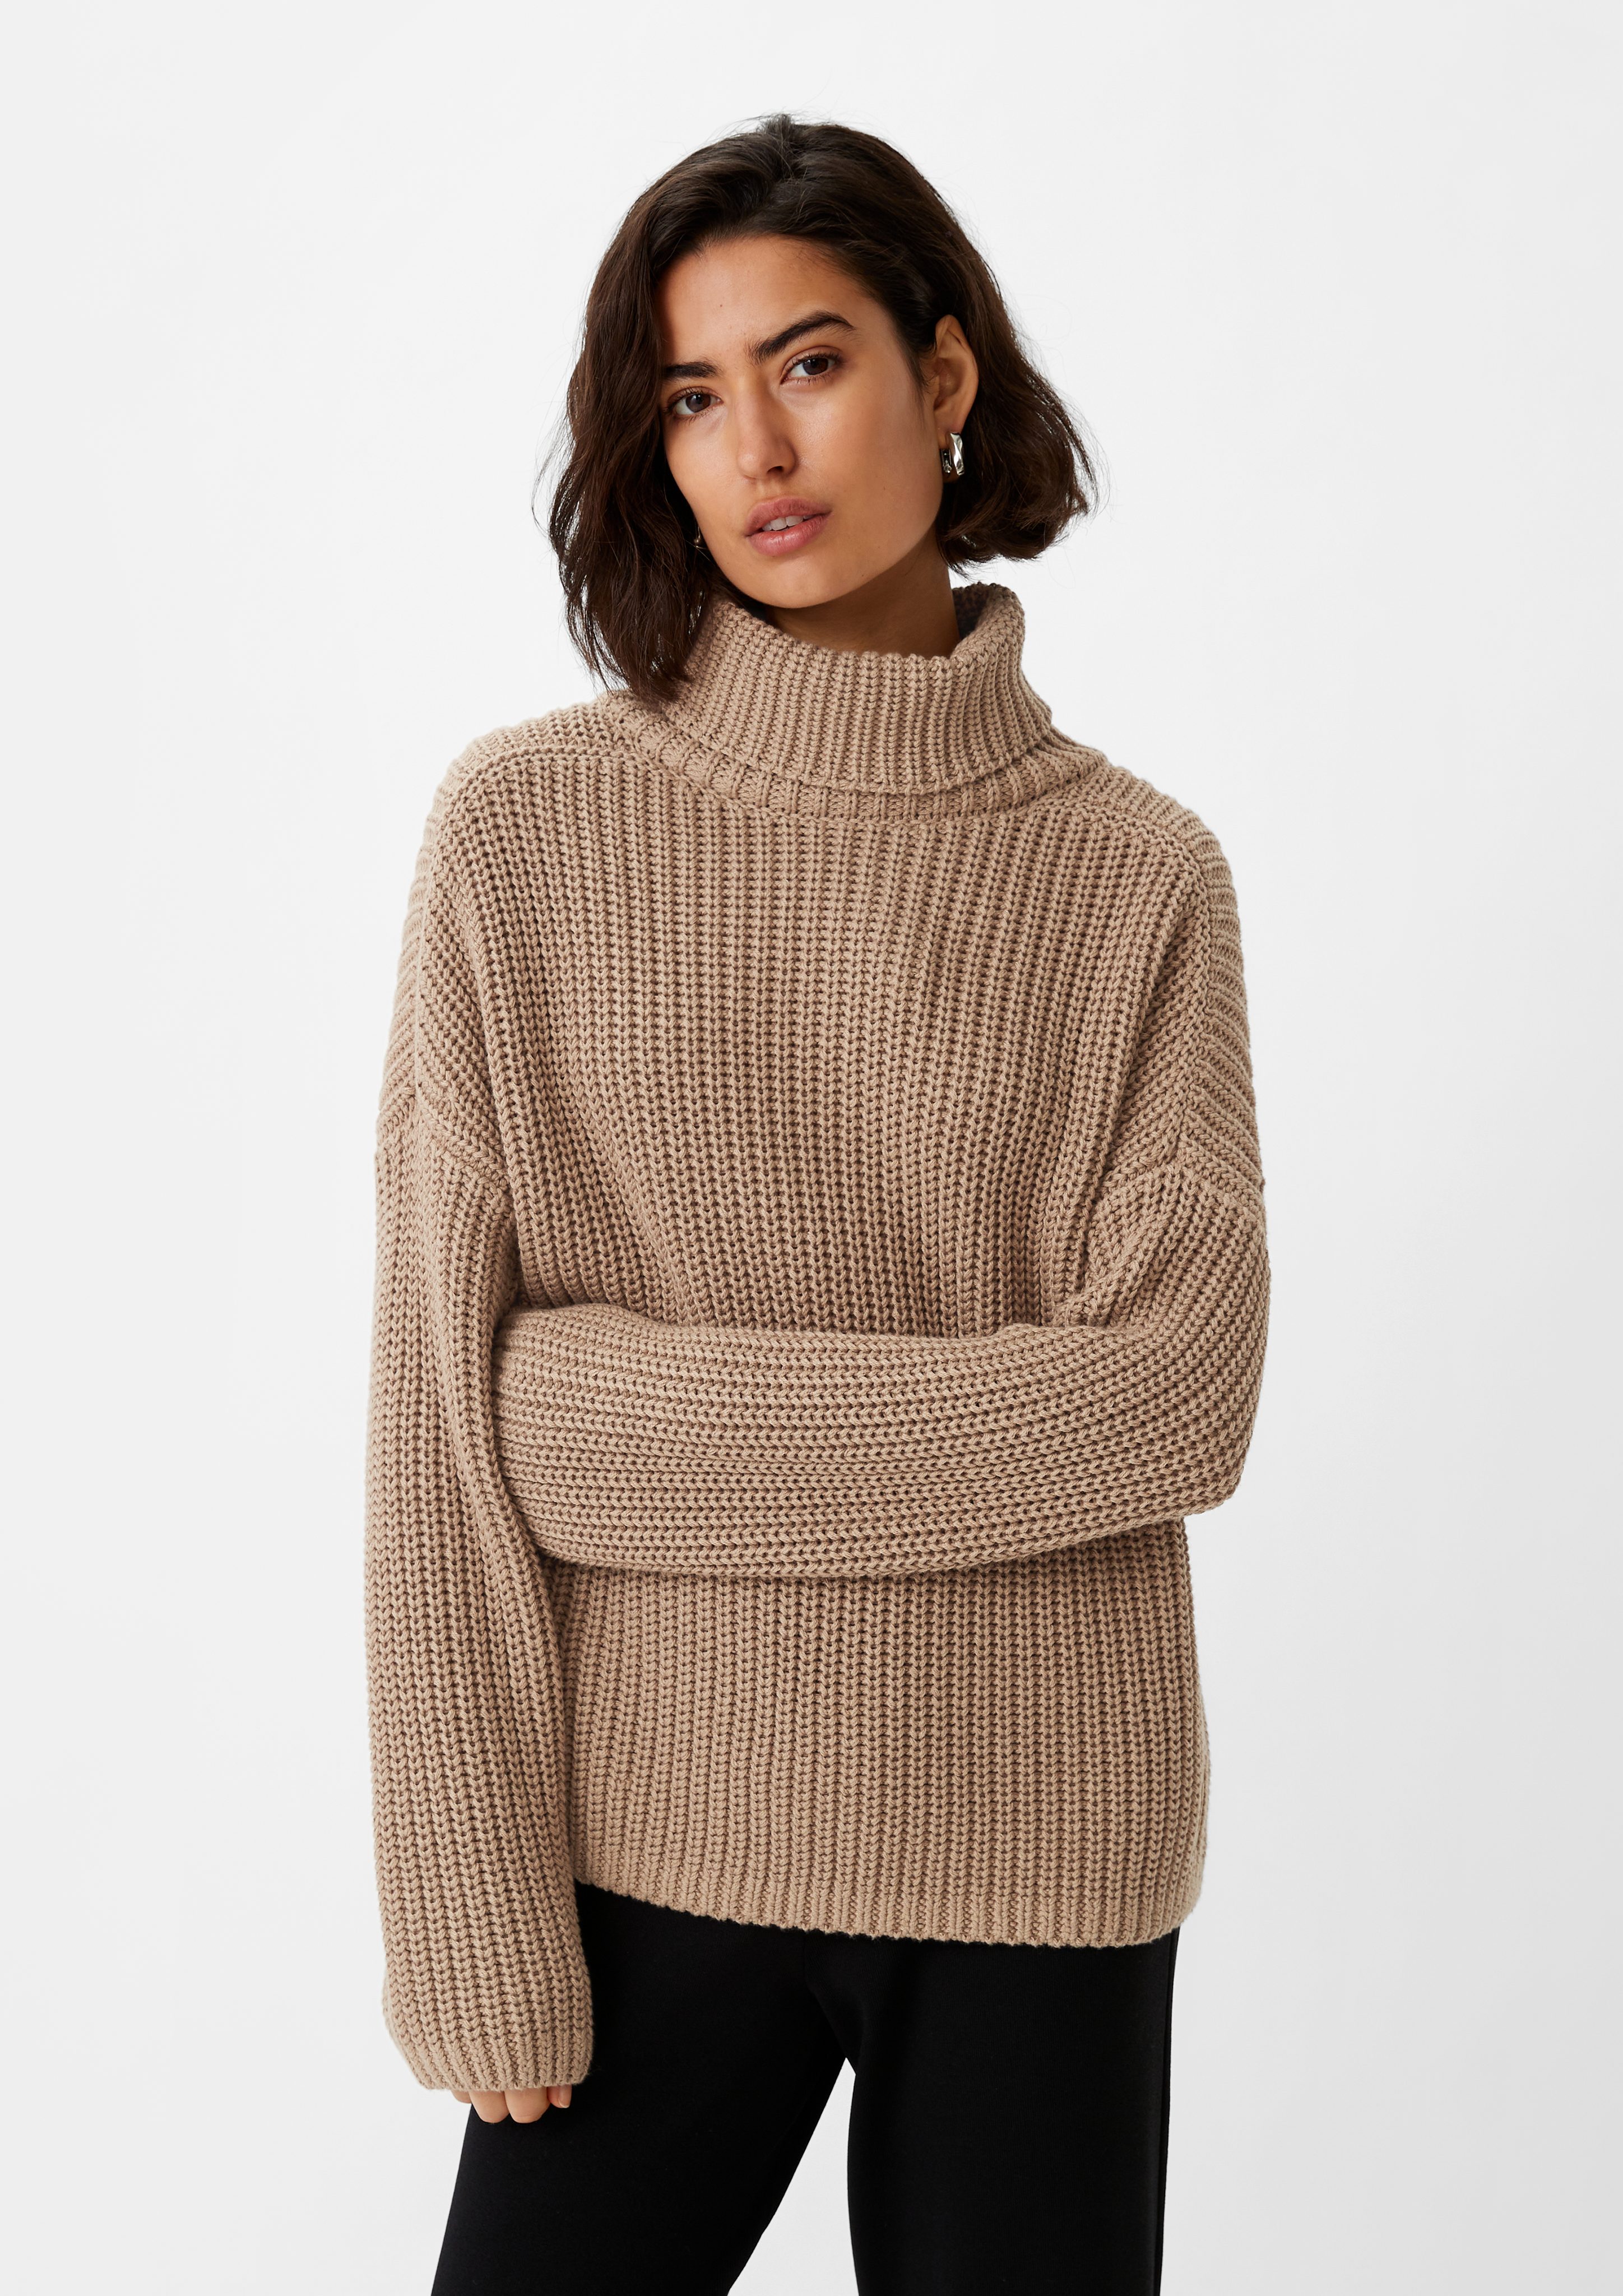 casual Label-Patch Rippstrickpullover mit identity Label-Patch sandstein Langarmshirt comma